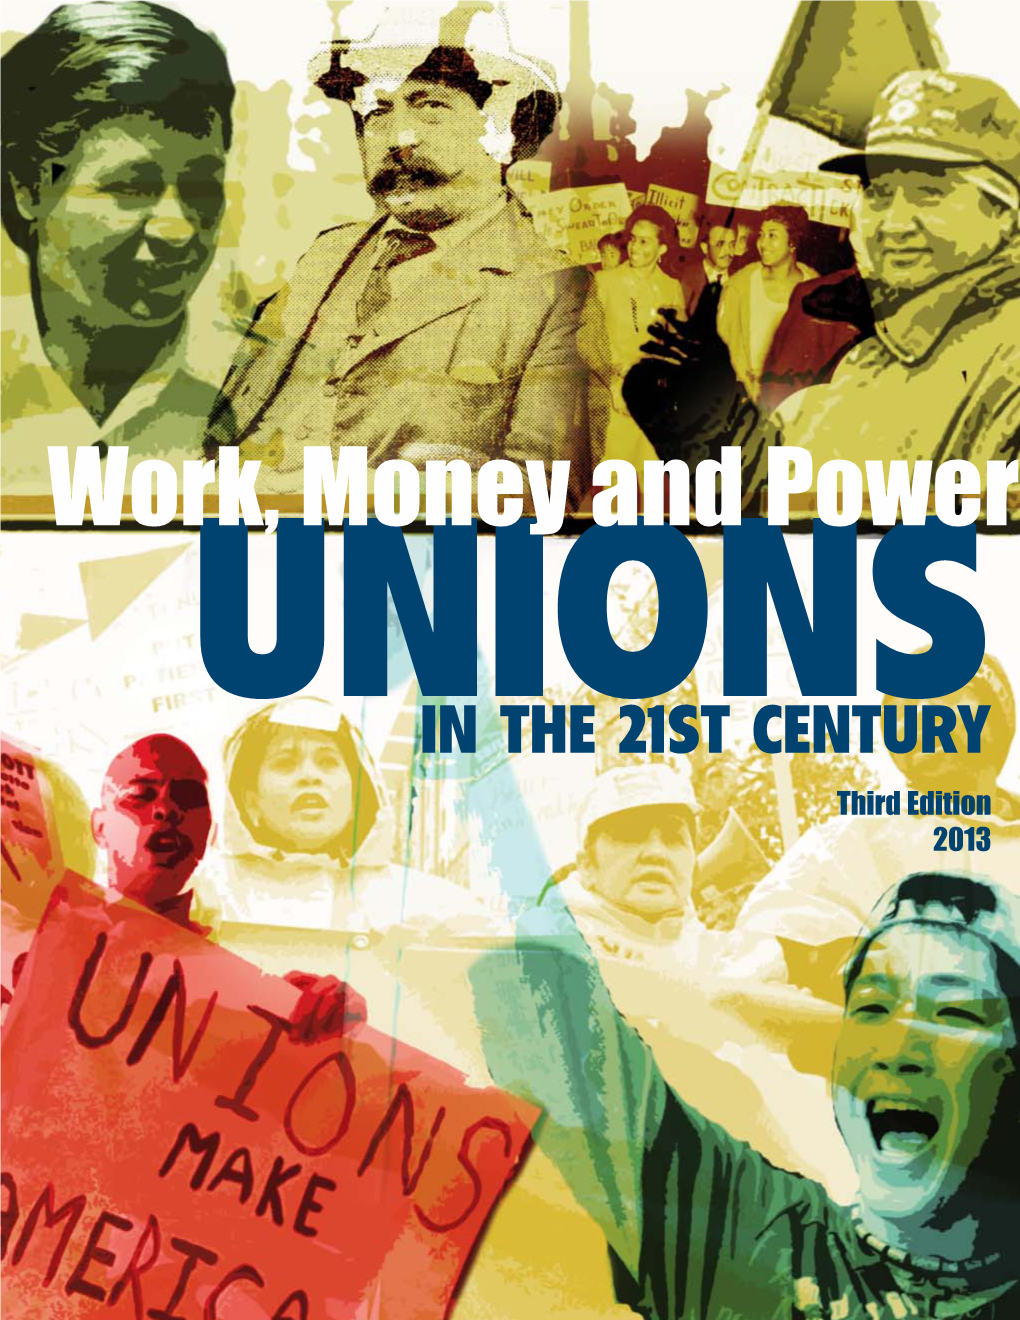 Work, Money and Power UNIONS in the 21ST CENTURY Third Edition 2013